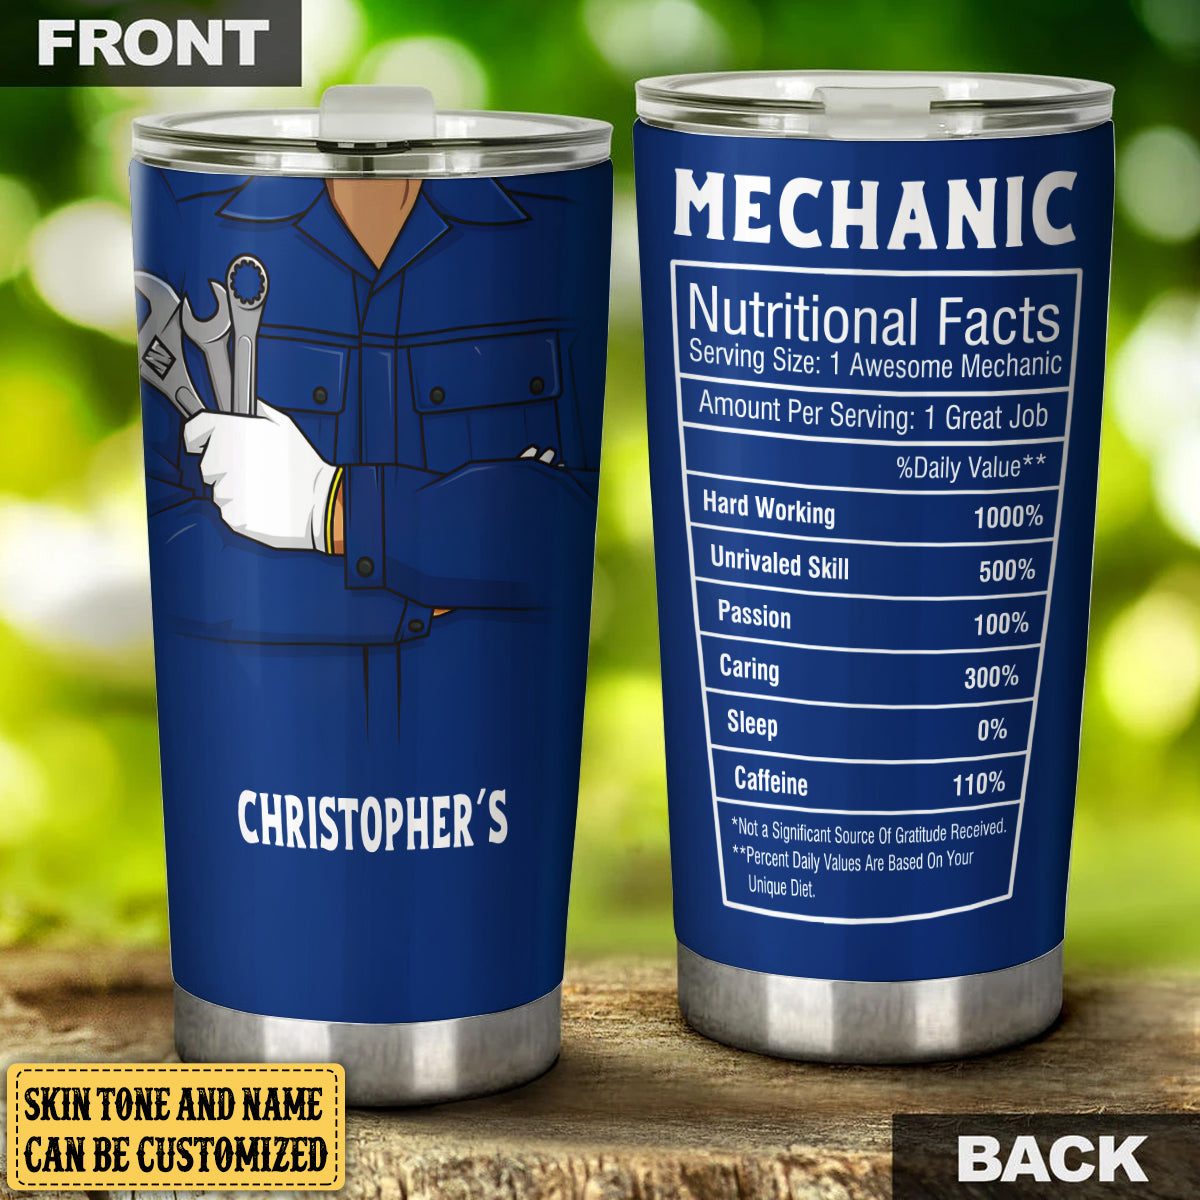 Personalized Mechanic Nutritional Facts Tumbler